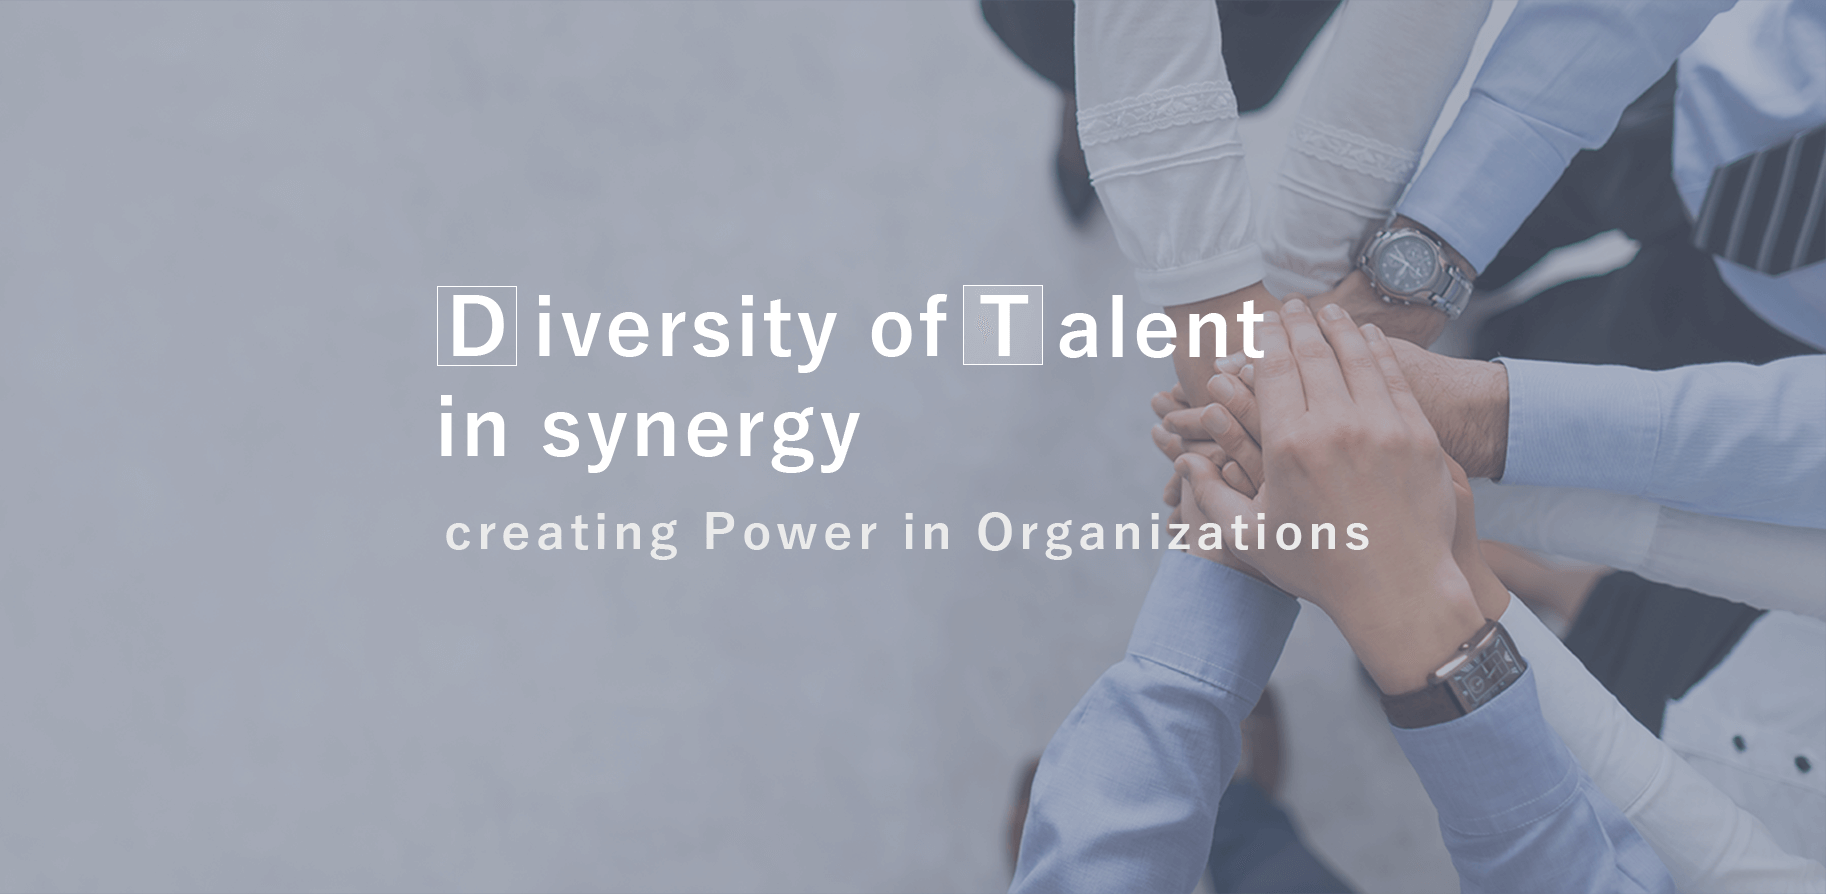 Diversity of Talent in synergy creating Power in Organizations